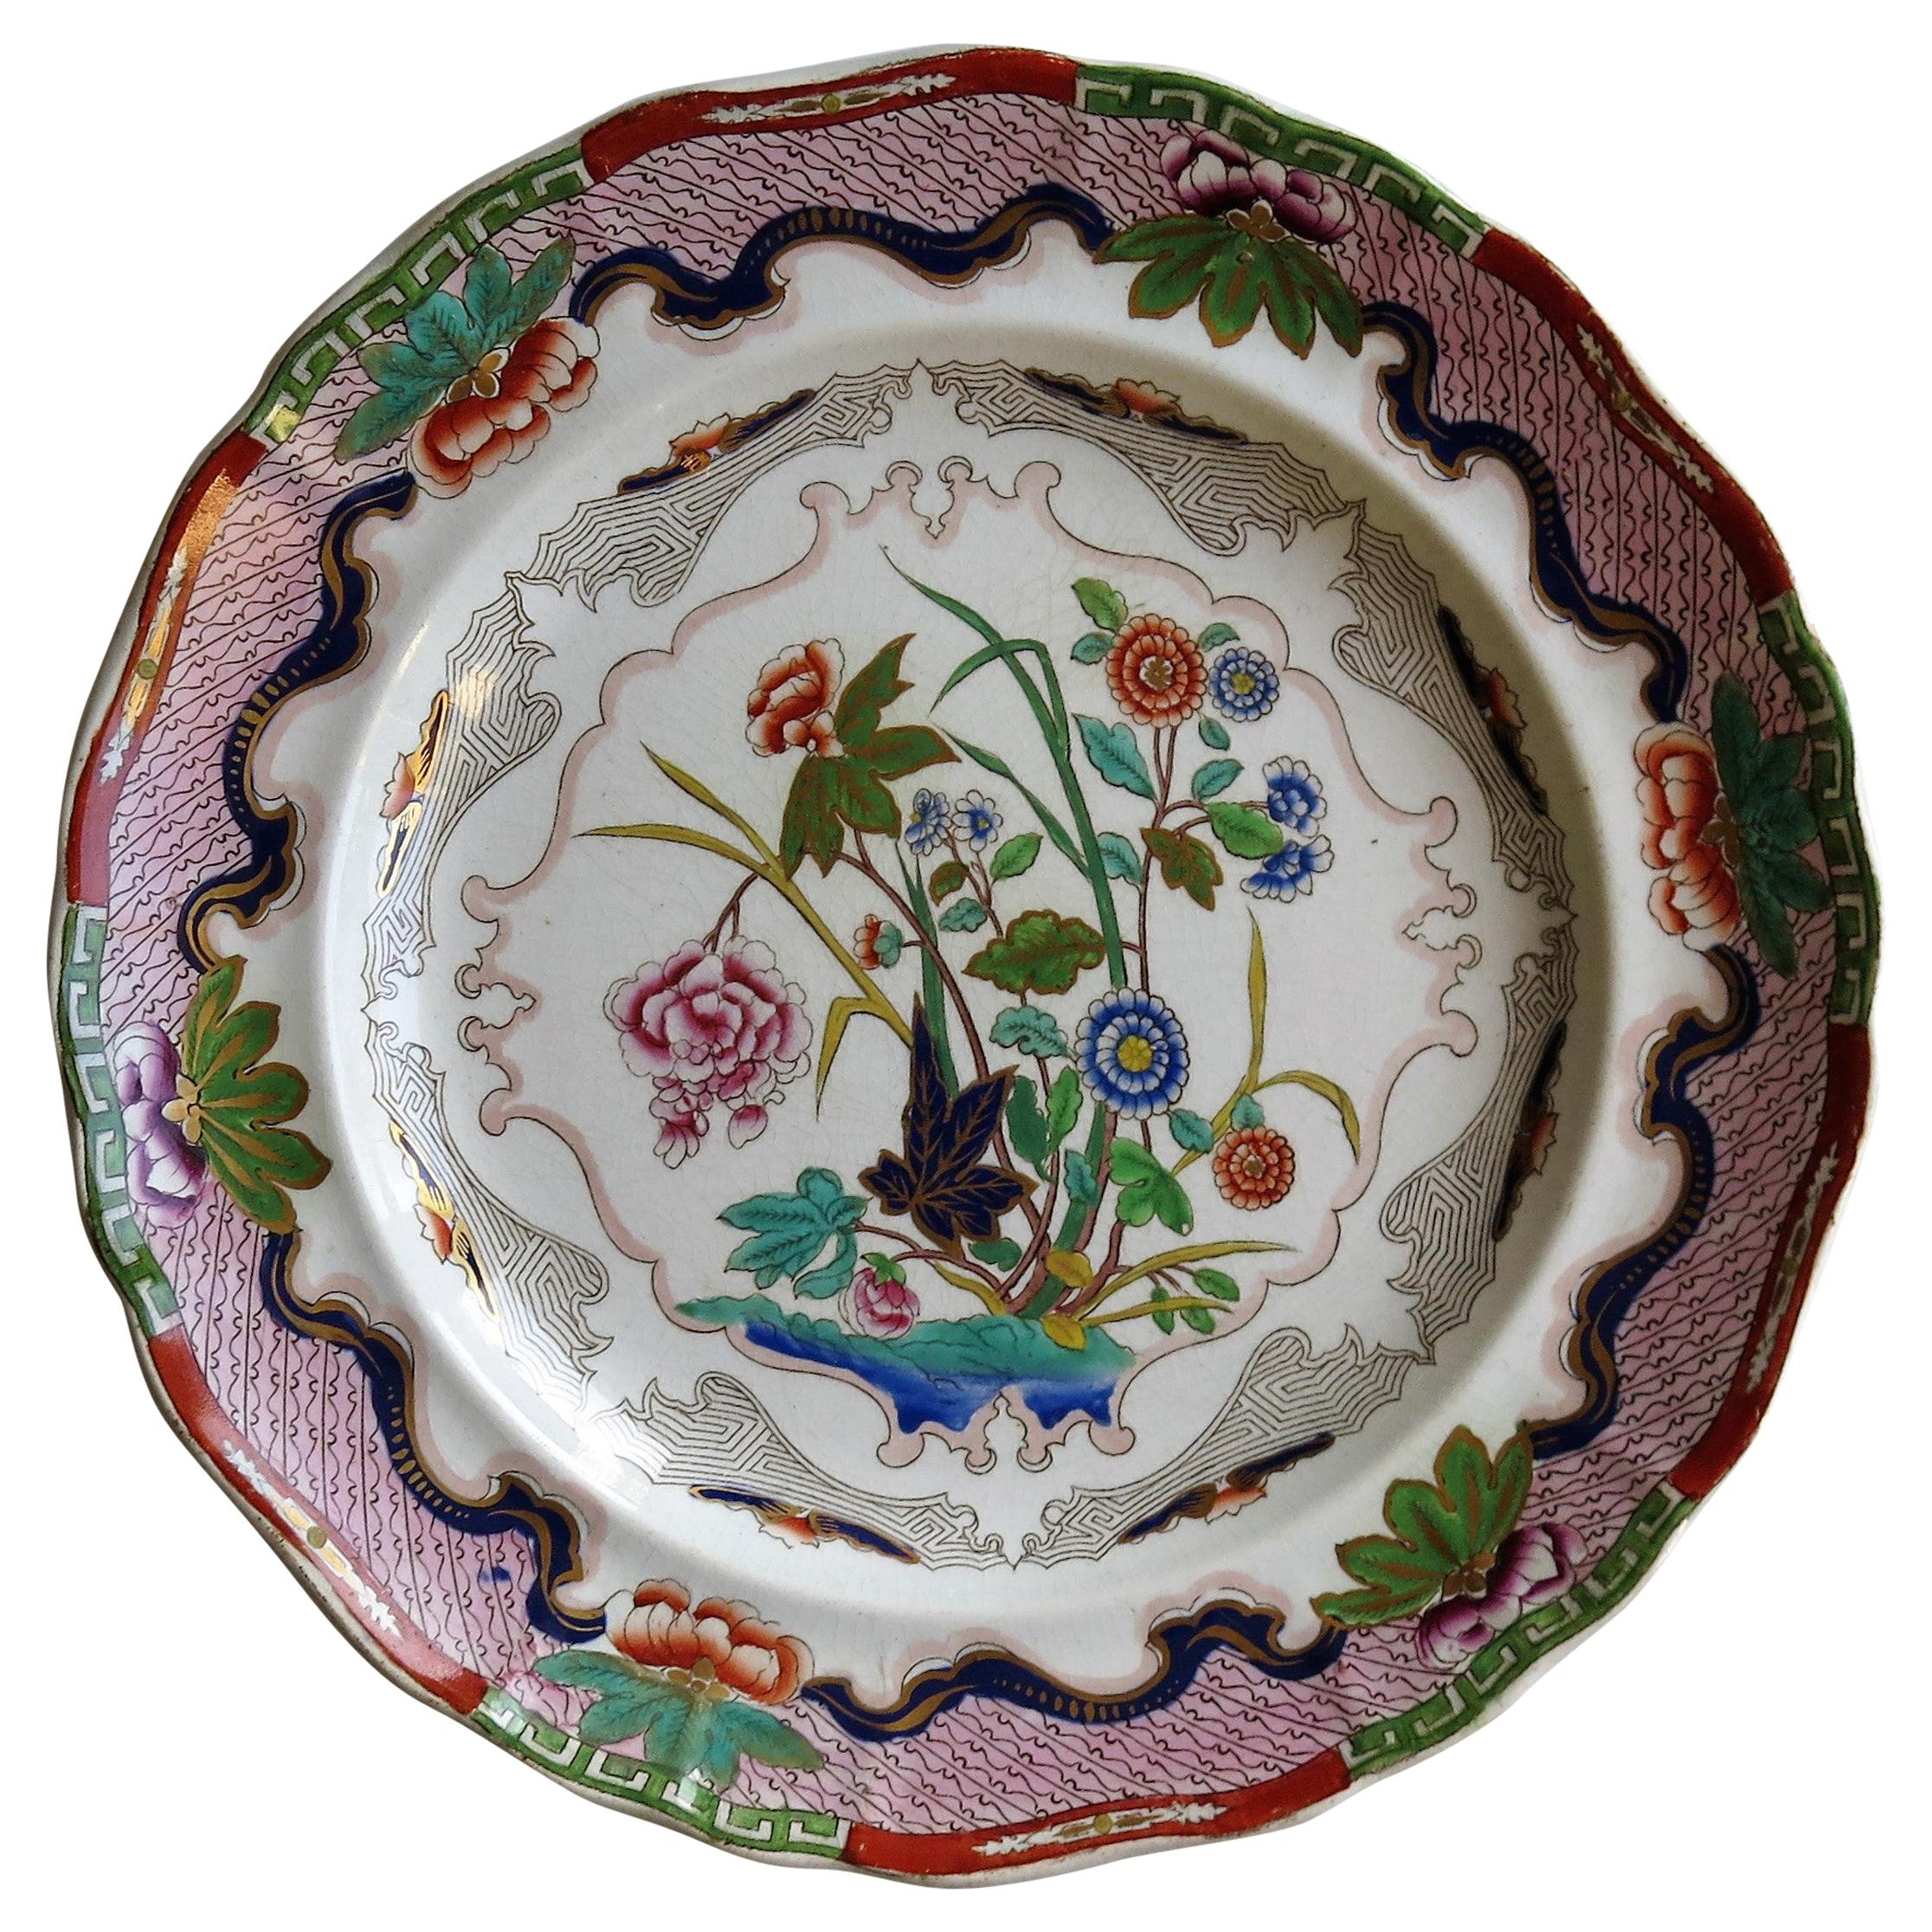 Charles Meigh Ironstone Plate Hand Painted Floral Pattern No. 422, circa 1840